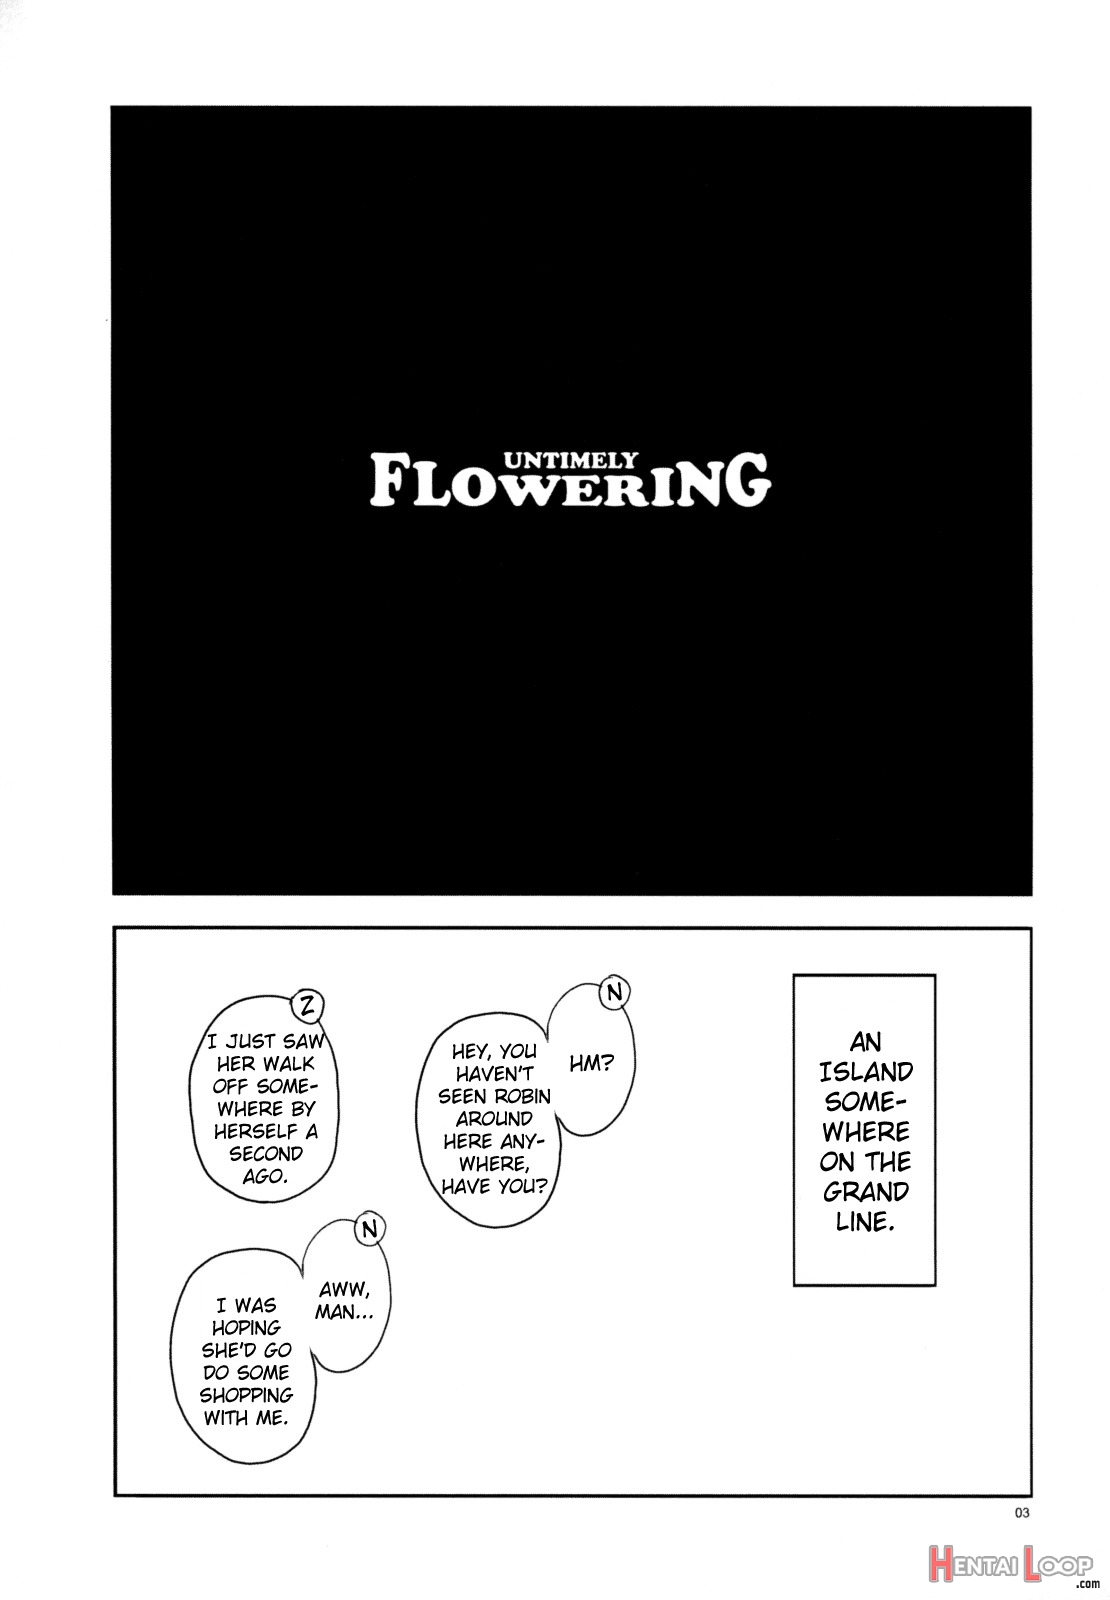 Untimely Flowering page 2